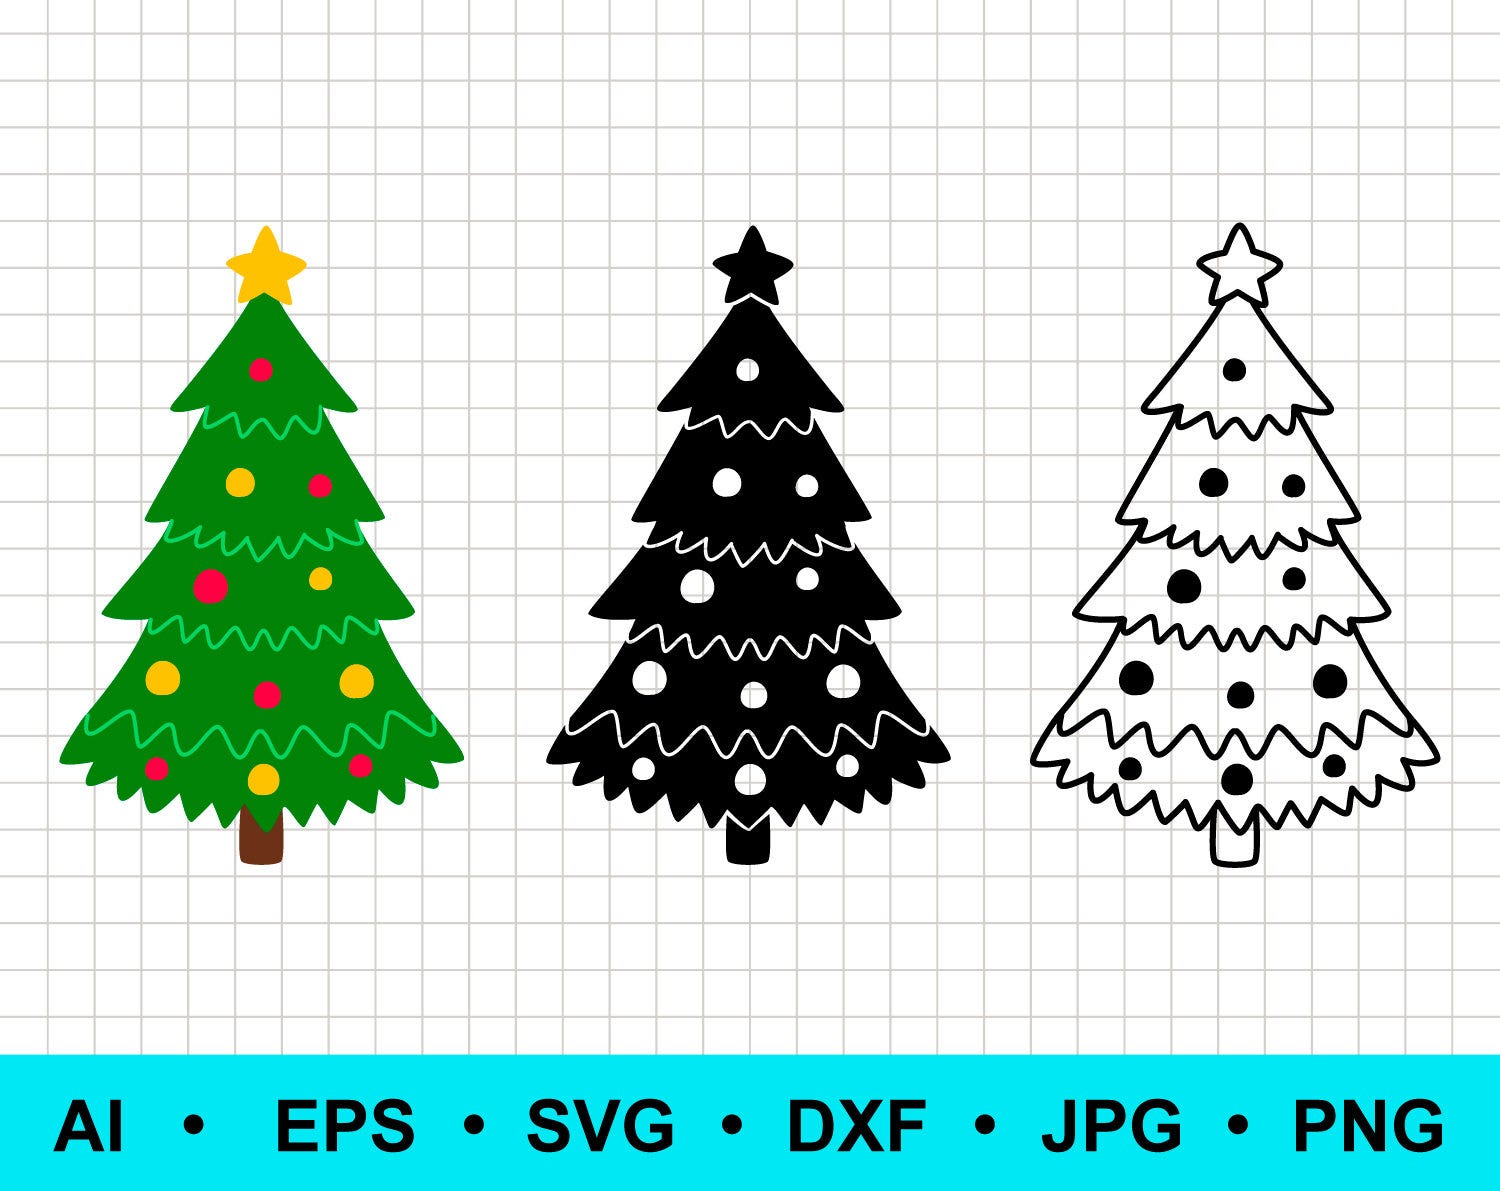 Christmas tree svg, dxf, eps, ai, jpg. Christmas tree png. Layered cutting files. Outline silhouette. Commercial use, digital vector clipart